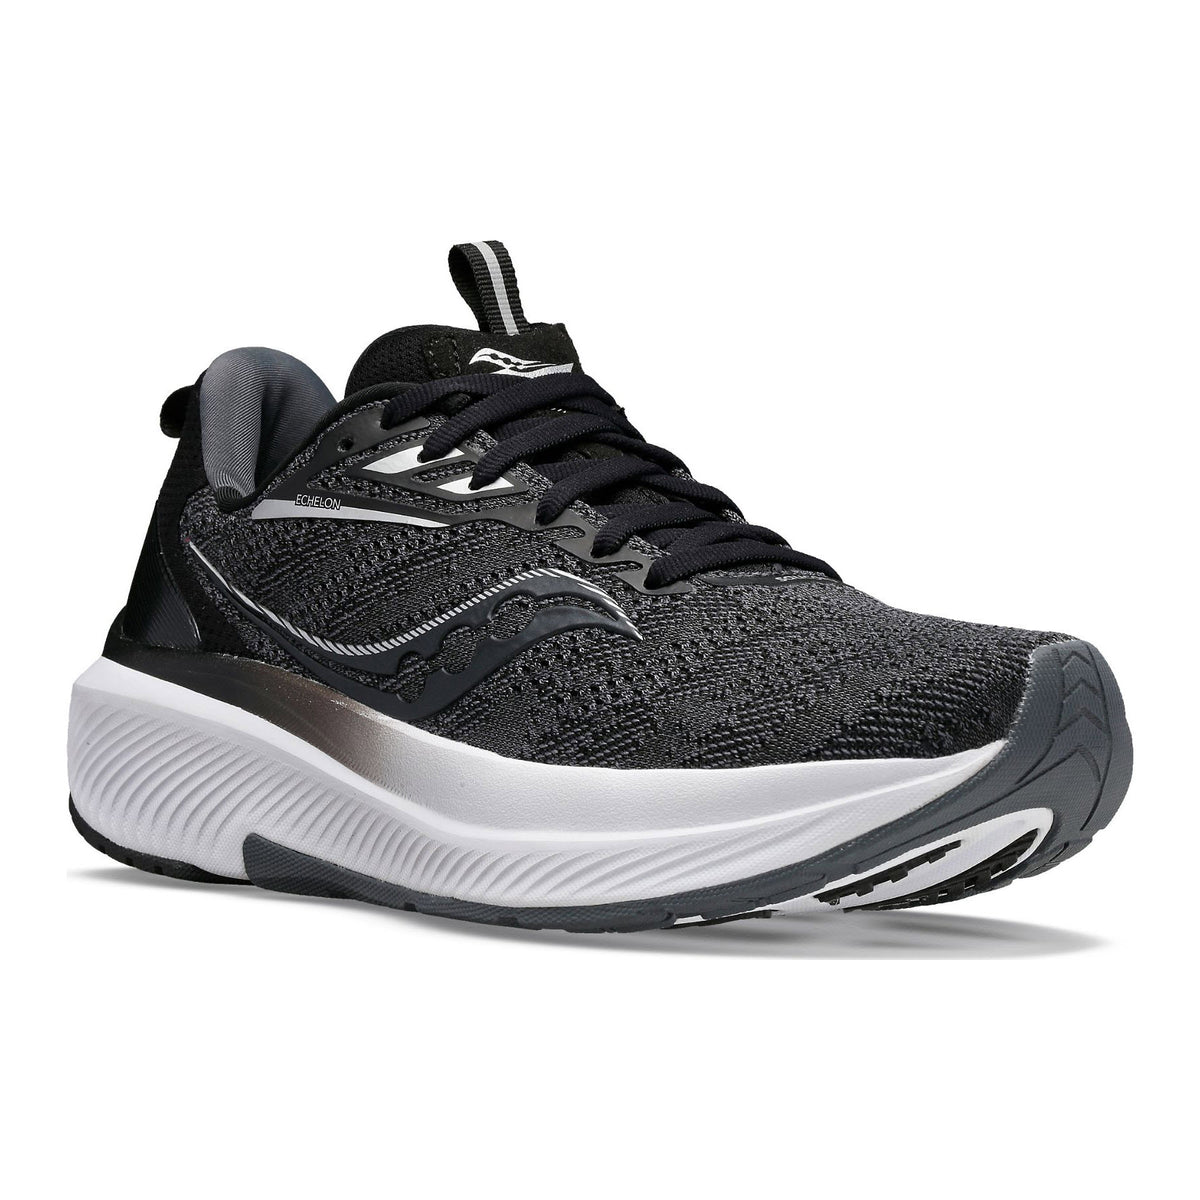 Black and gray Saucony Echelon 9 running shoe with max cushioning, featuring a white sole and curved laces, displayed against a white background.
Product Name: SAUCONY ECHELON 9 BLACK/WHITE - WOMENS
Brand Name: Saucony